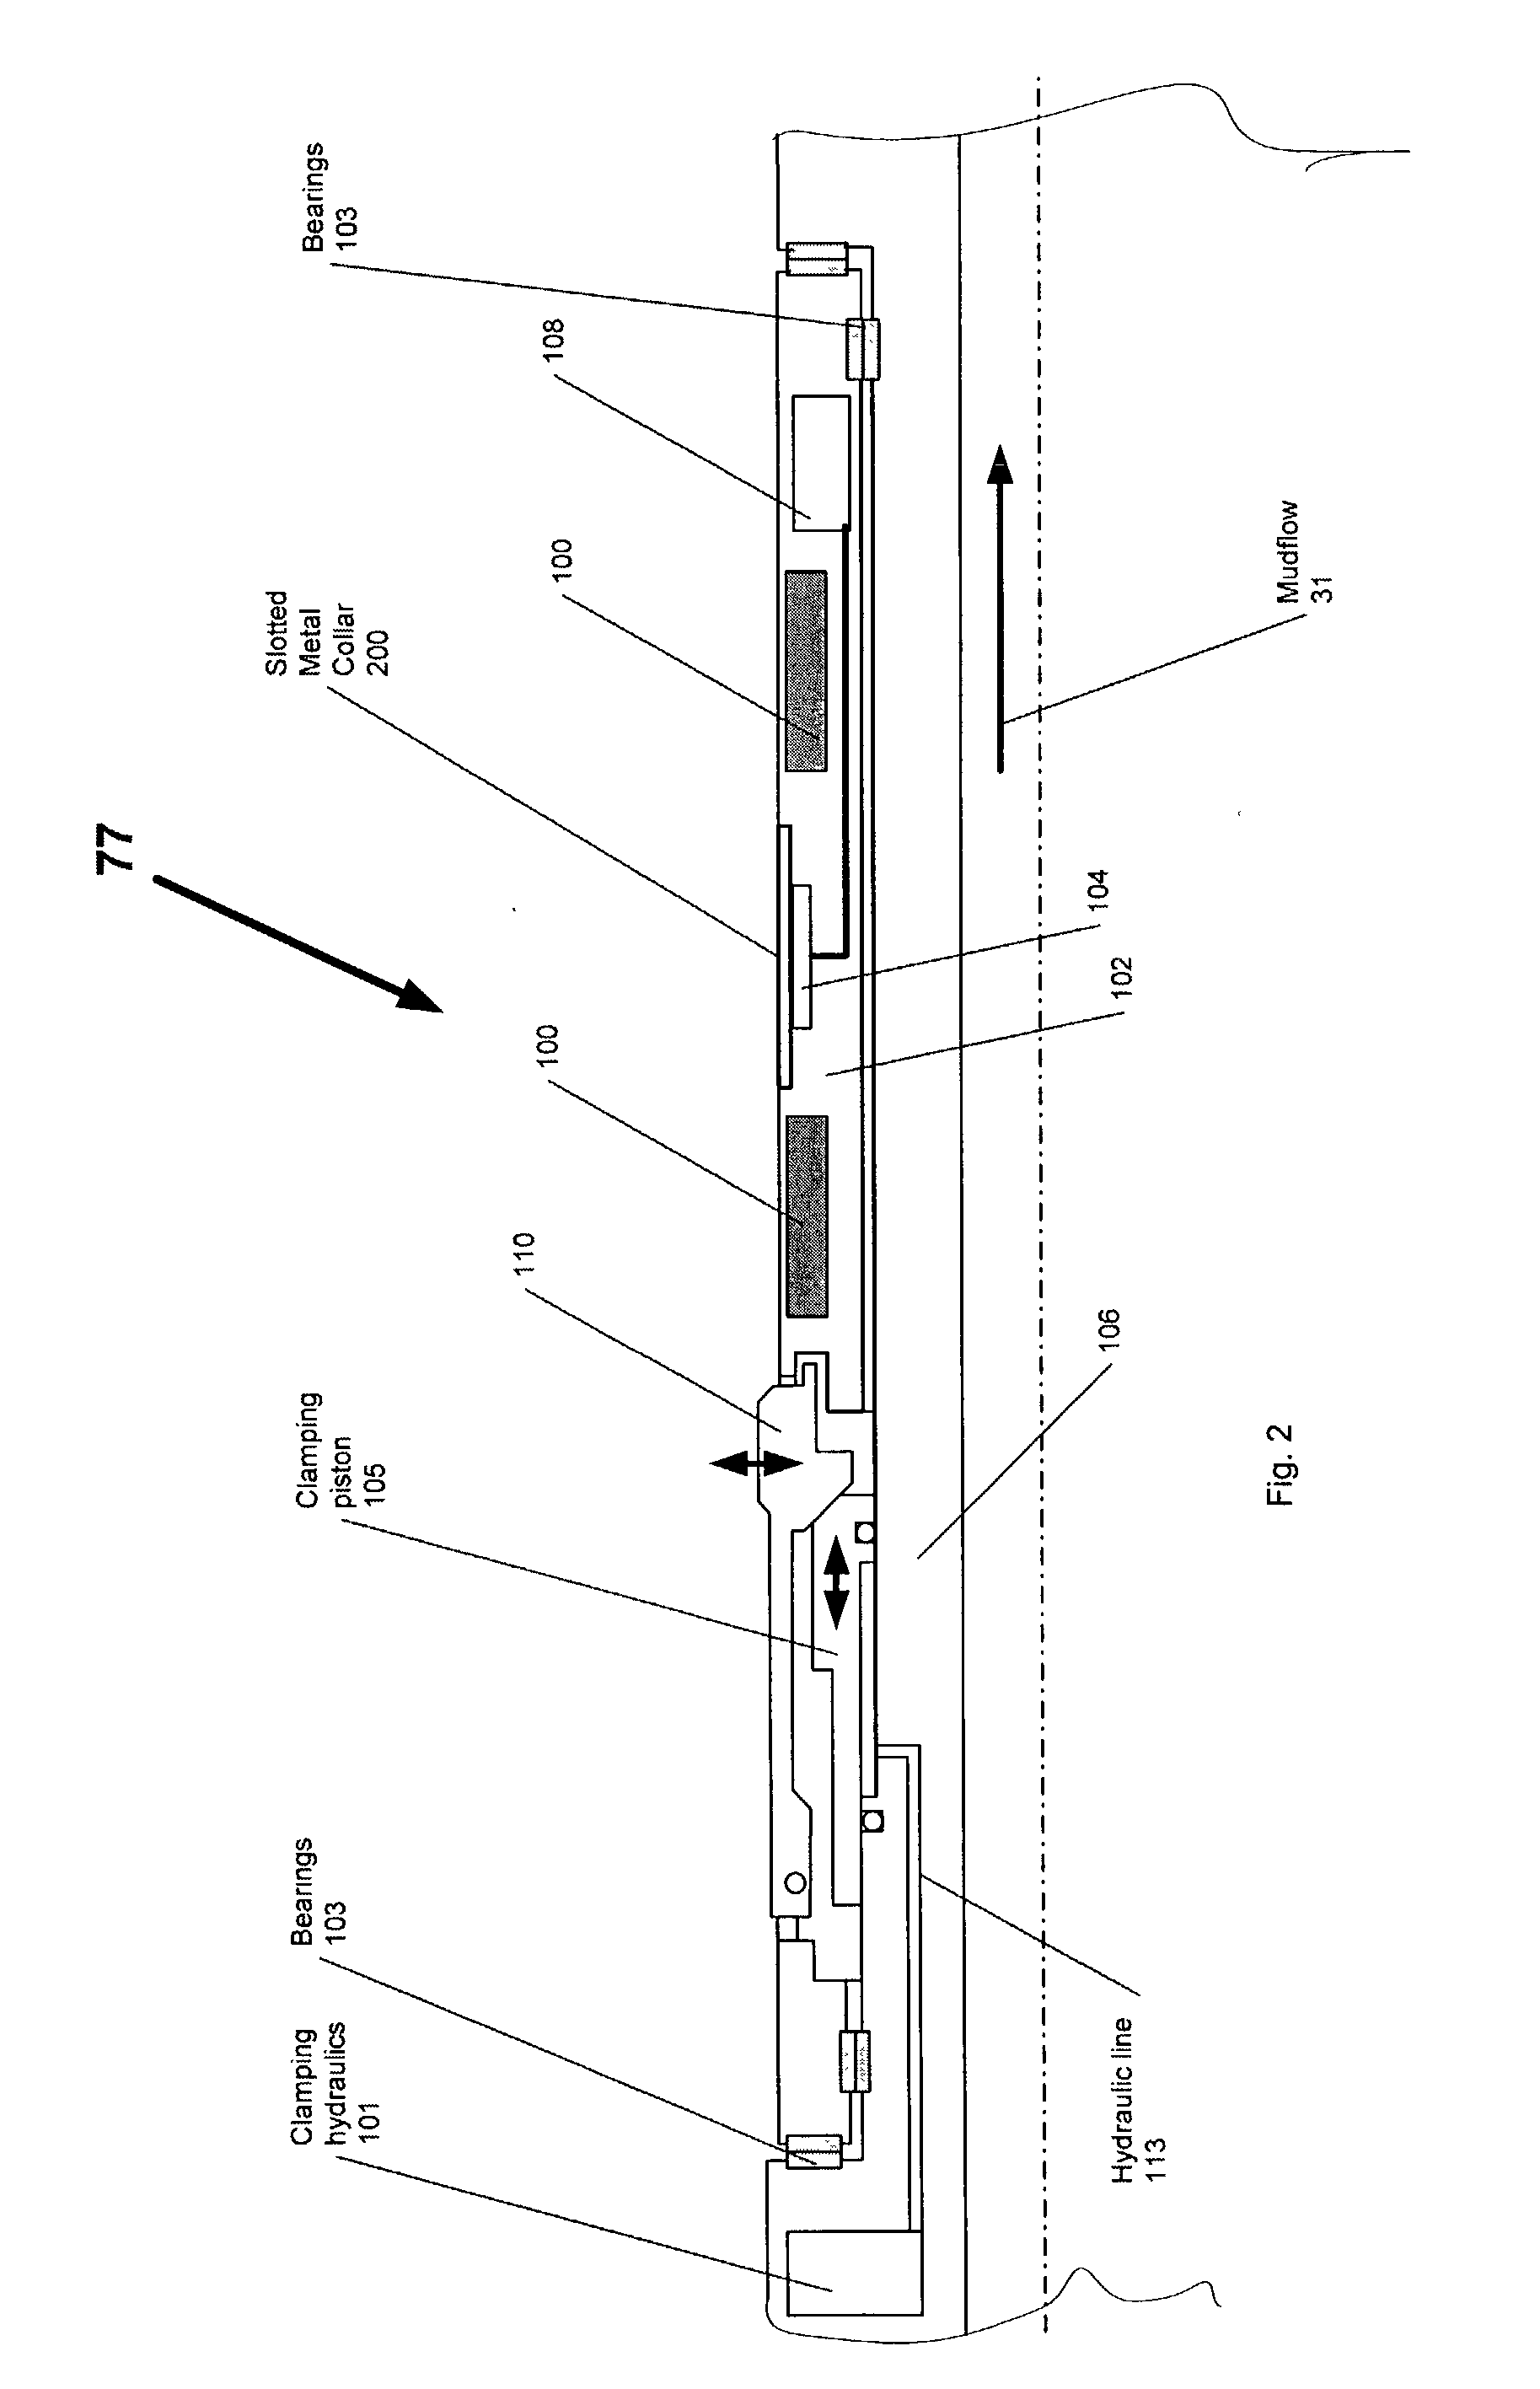 Method and apparatus for an NMR antenna with slotted metal cover